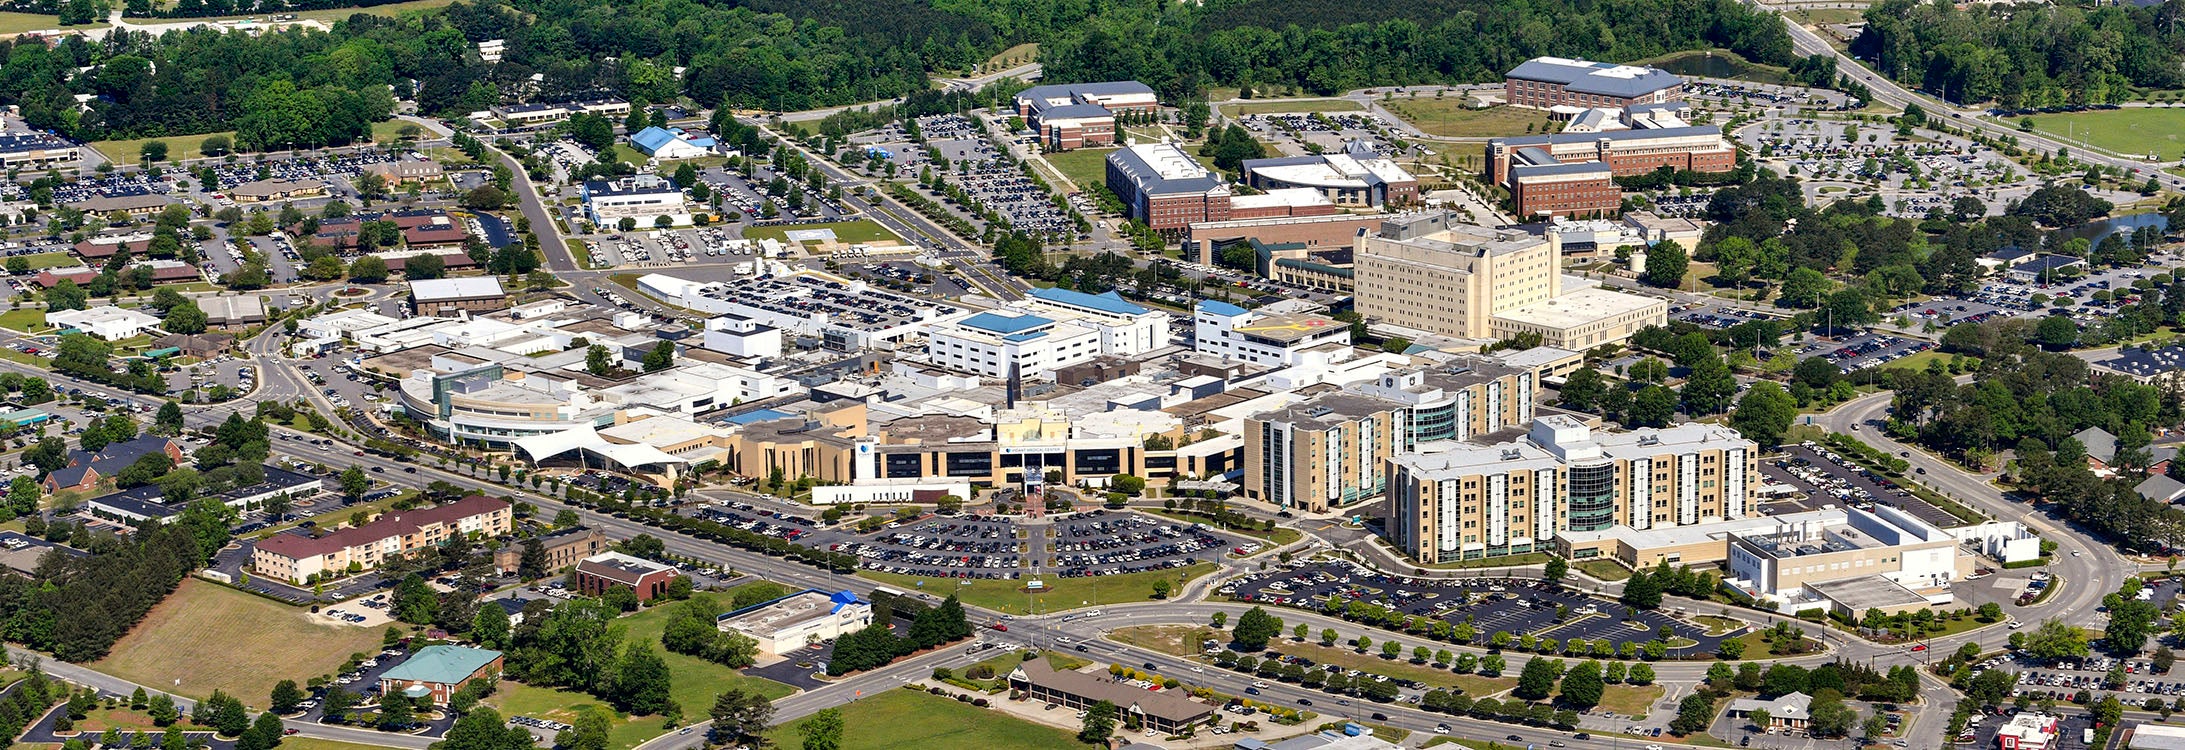 A new clinical trial partnership between East Carolina University’s Brody School of Medicine and Vidant Health has been awarded membership to the Alliance for Clinical Trials in Oncology. (Photo courtesy of Vidant Health)